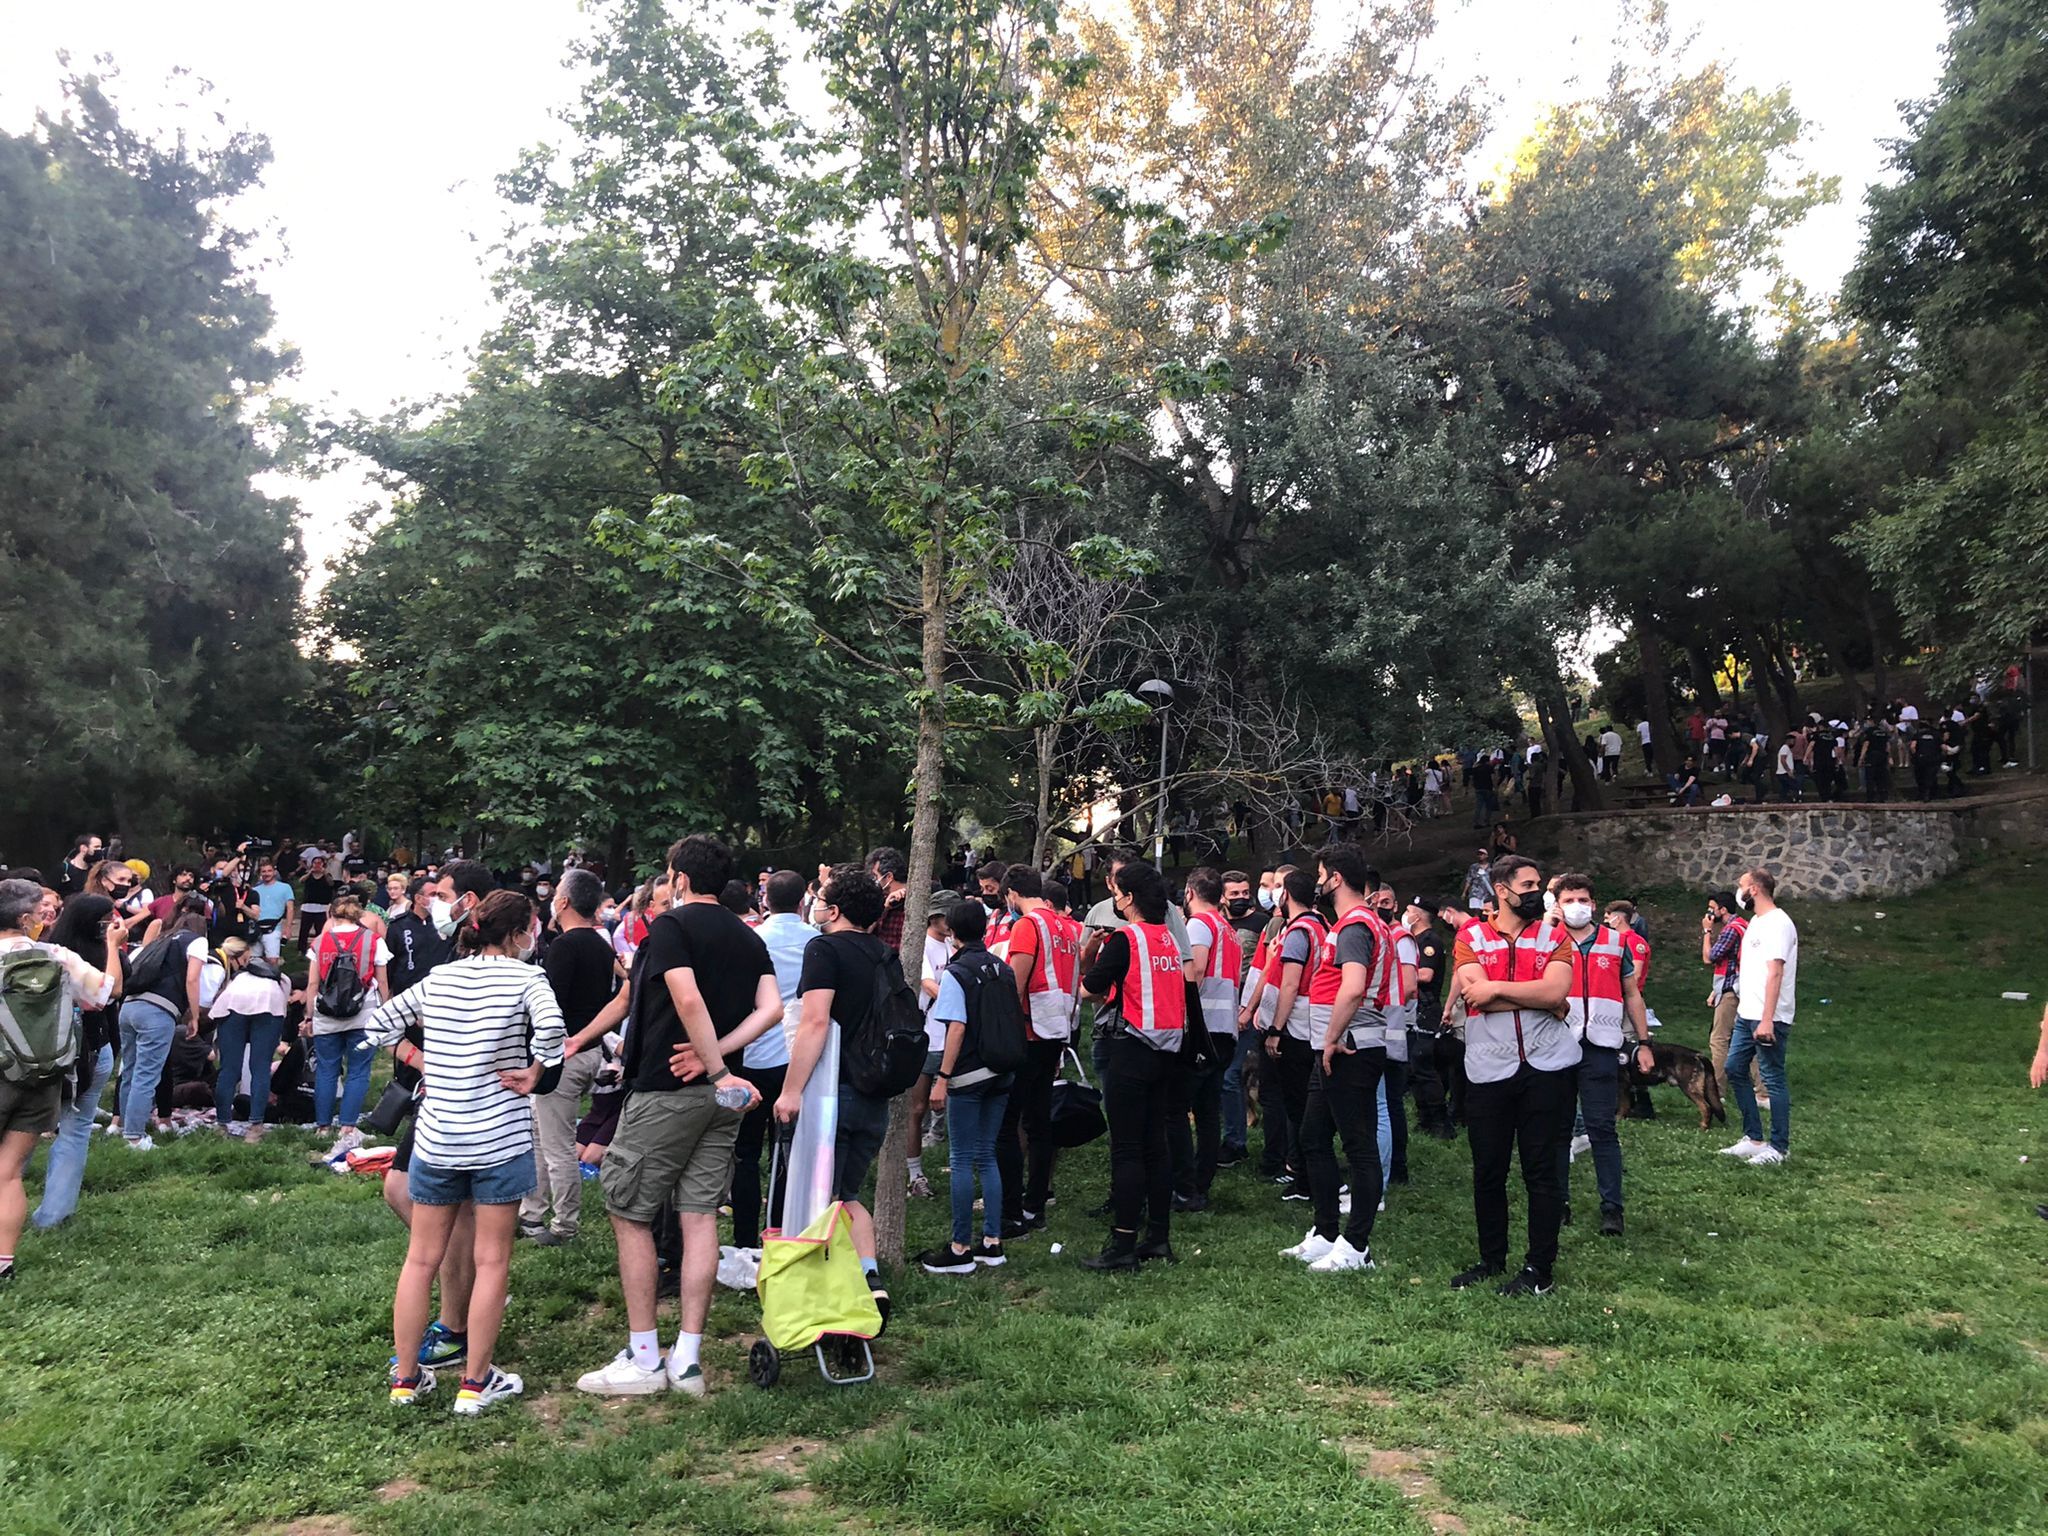 Police use force to disperse attendees of Pride Week picnic in İstanbul's Maçka Park 1